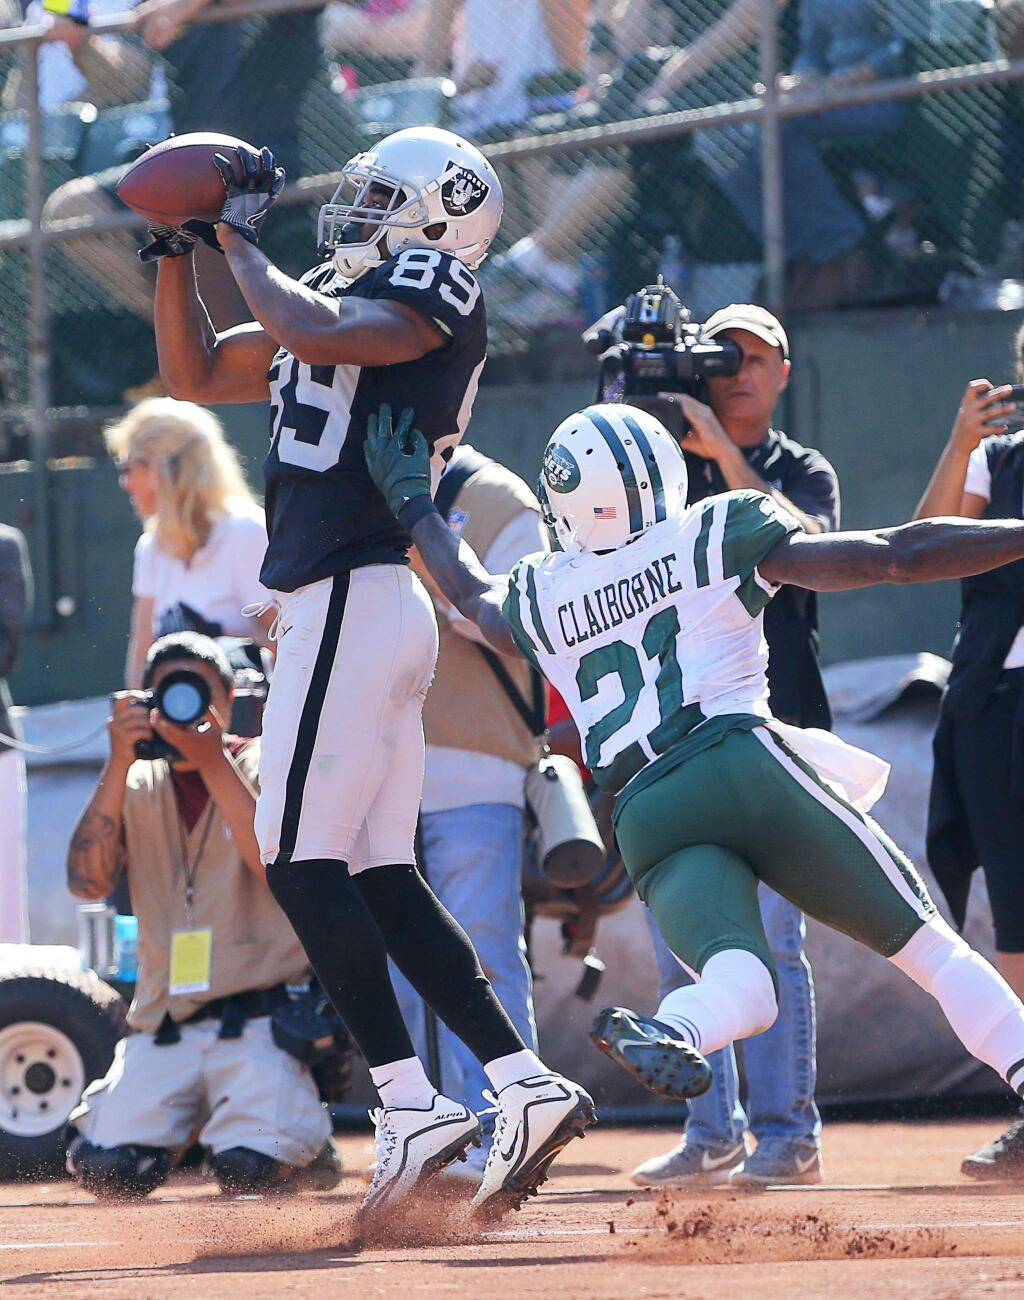 Oakland Raiders wide receiver Amari Cooper is unable to catch the pass in the end zone, but New York Jets cornerback Morris Claiborne is called for pass interference on the play, in Oakland on Sunday, Sept. 17, 2017. (Christopher Chung / The Press Democrat)